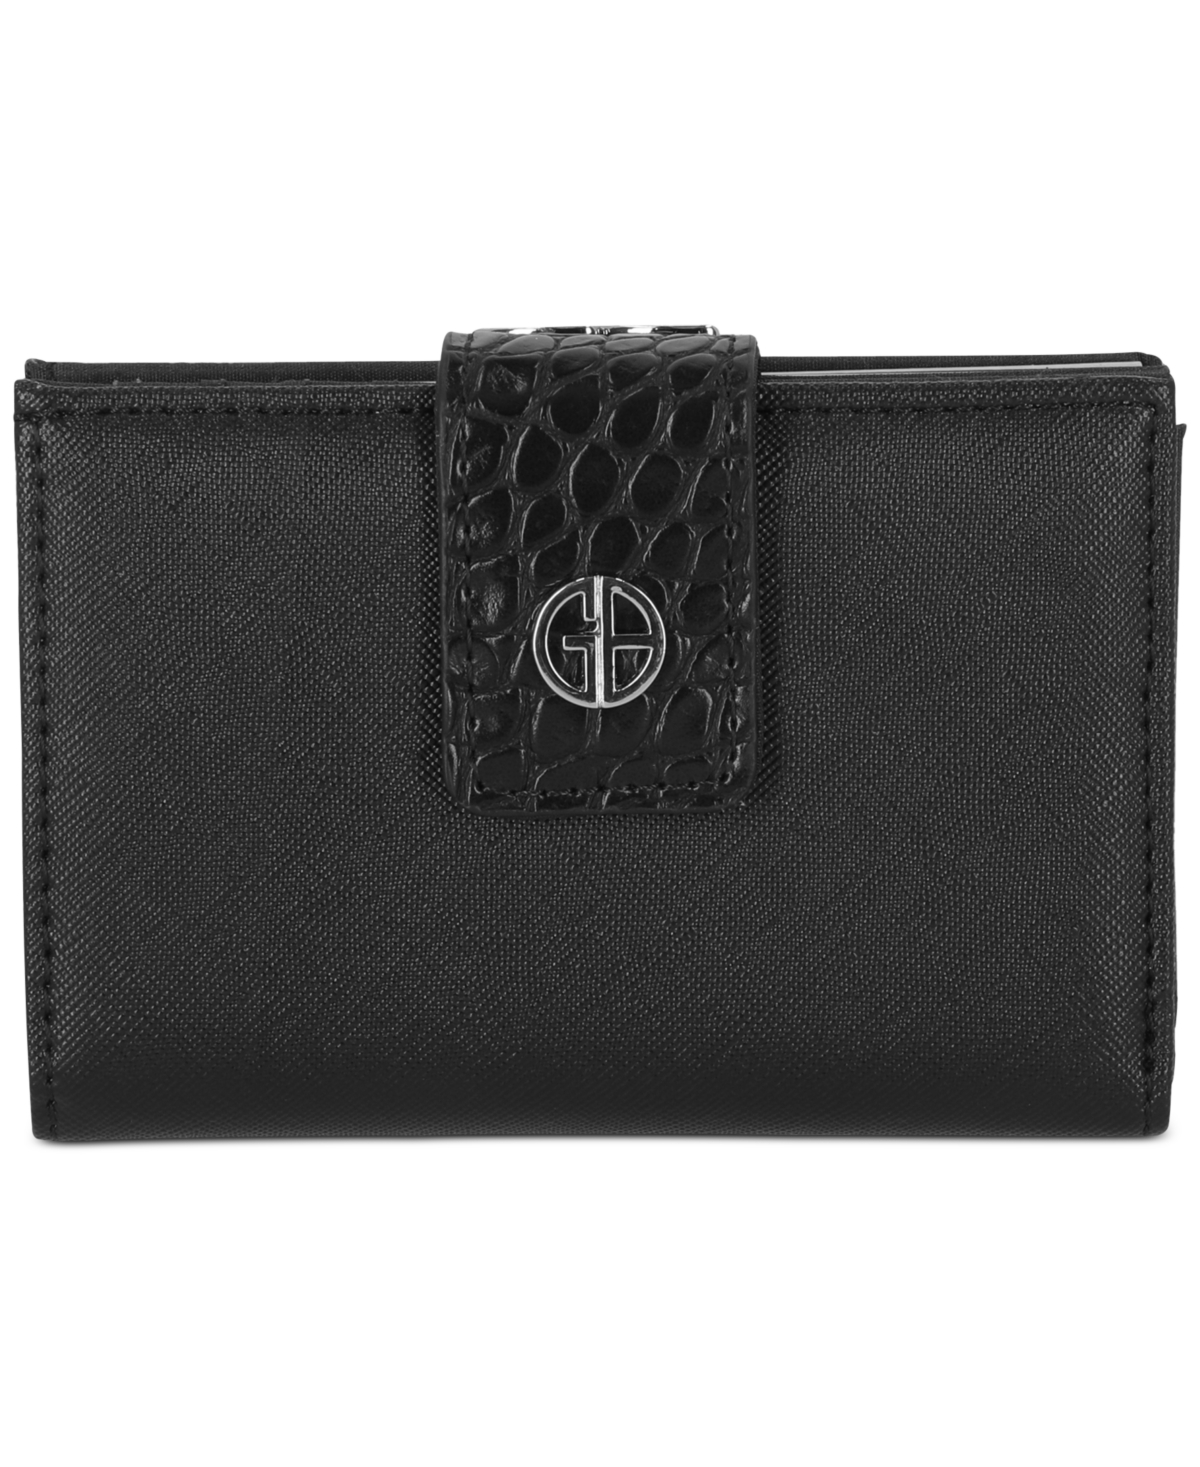 Framed Indexer Wallet, Created for Macy's - Black